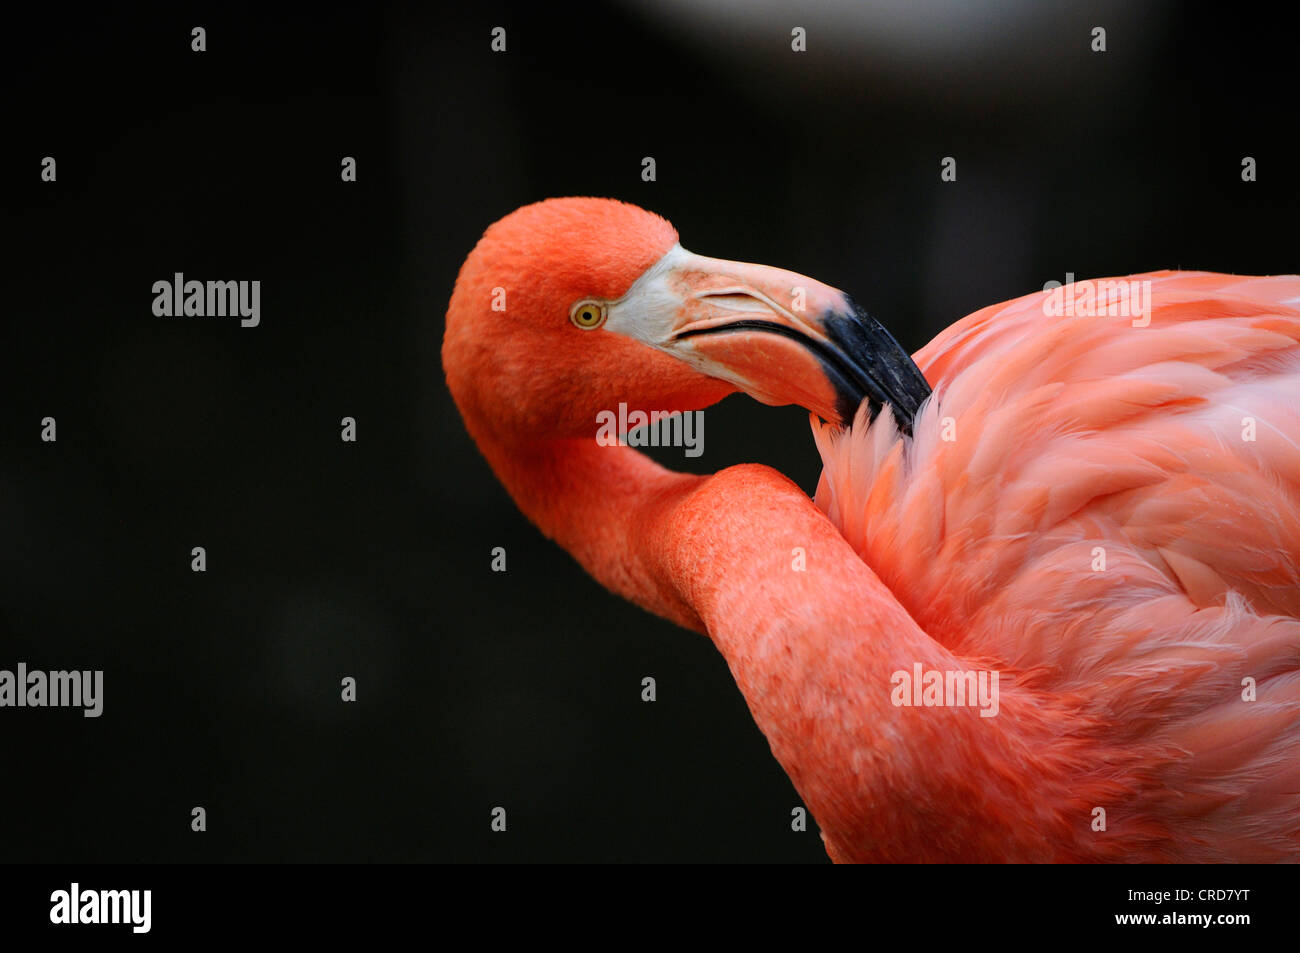 American Flamingo (Phoenicopterus ruber), close-up Banque D'Images